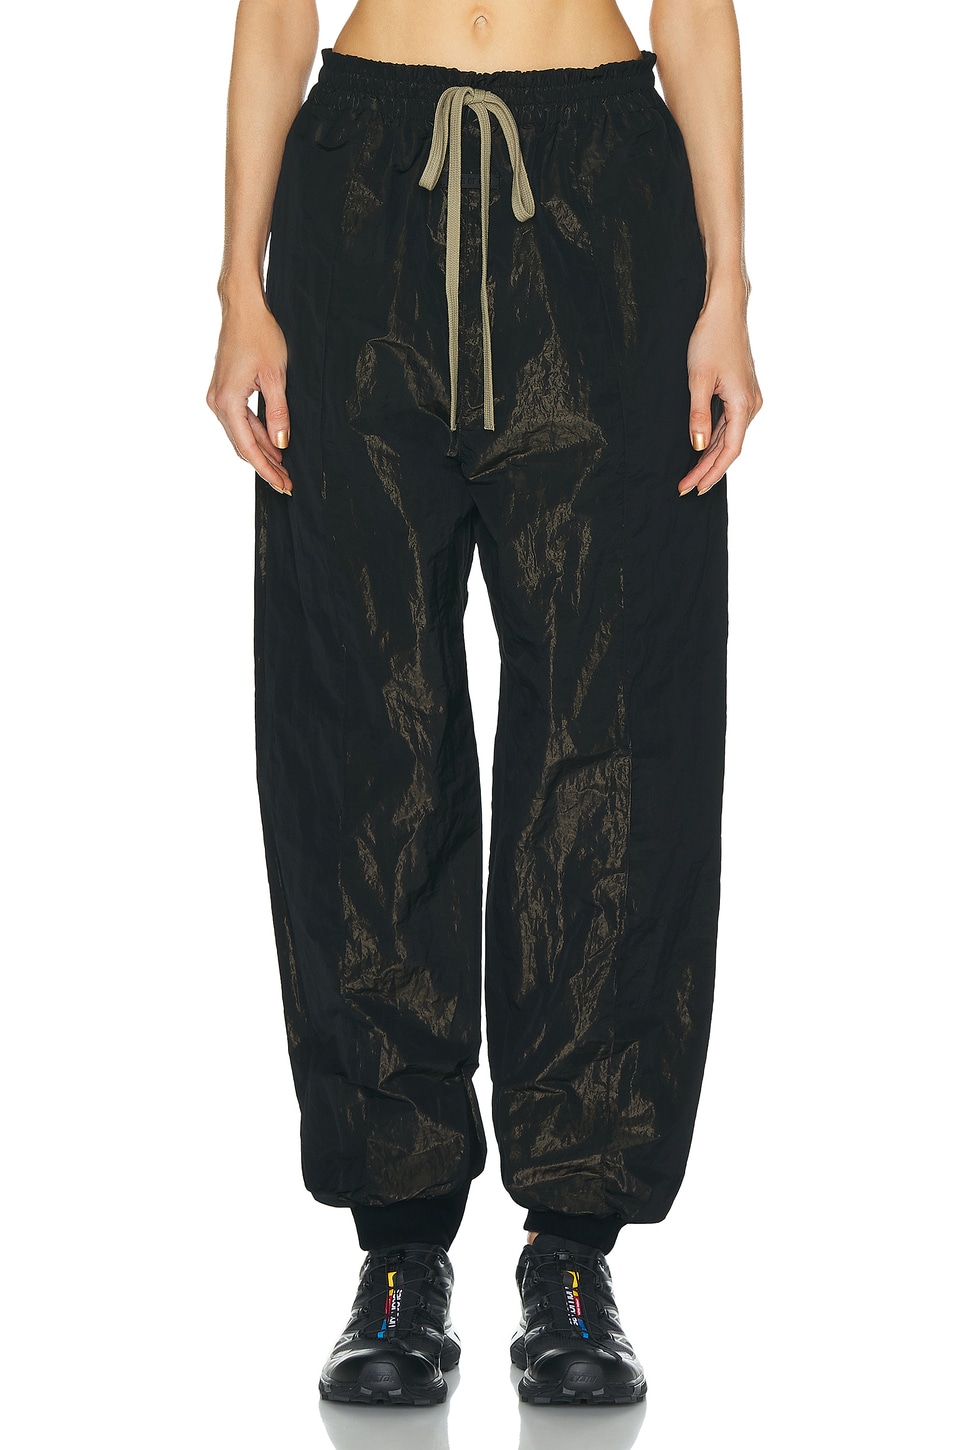 Image 1 of Fear of God Wrinkled Polyester Pintuck Sweatpant in Black